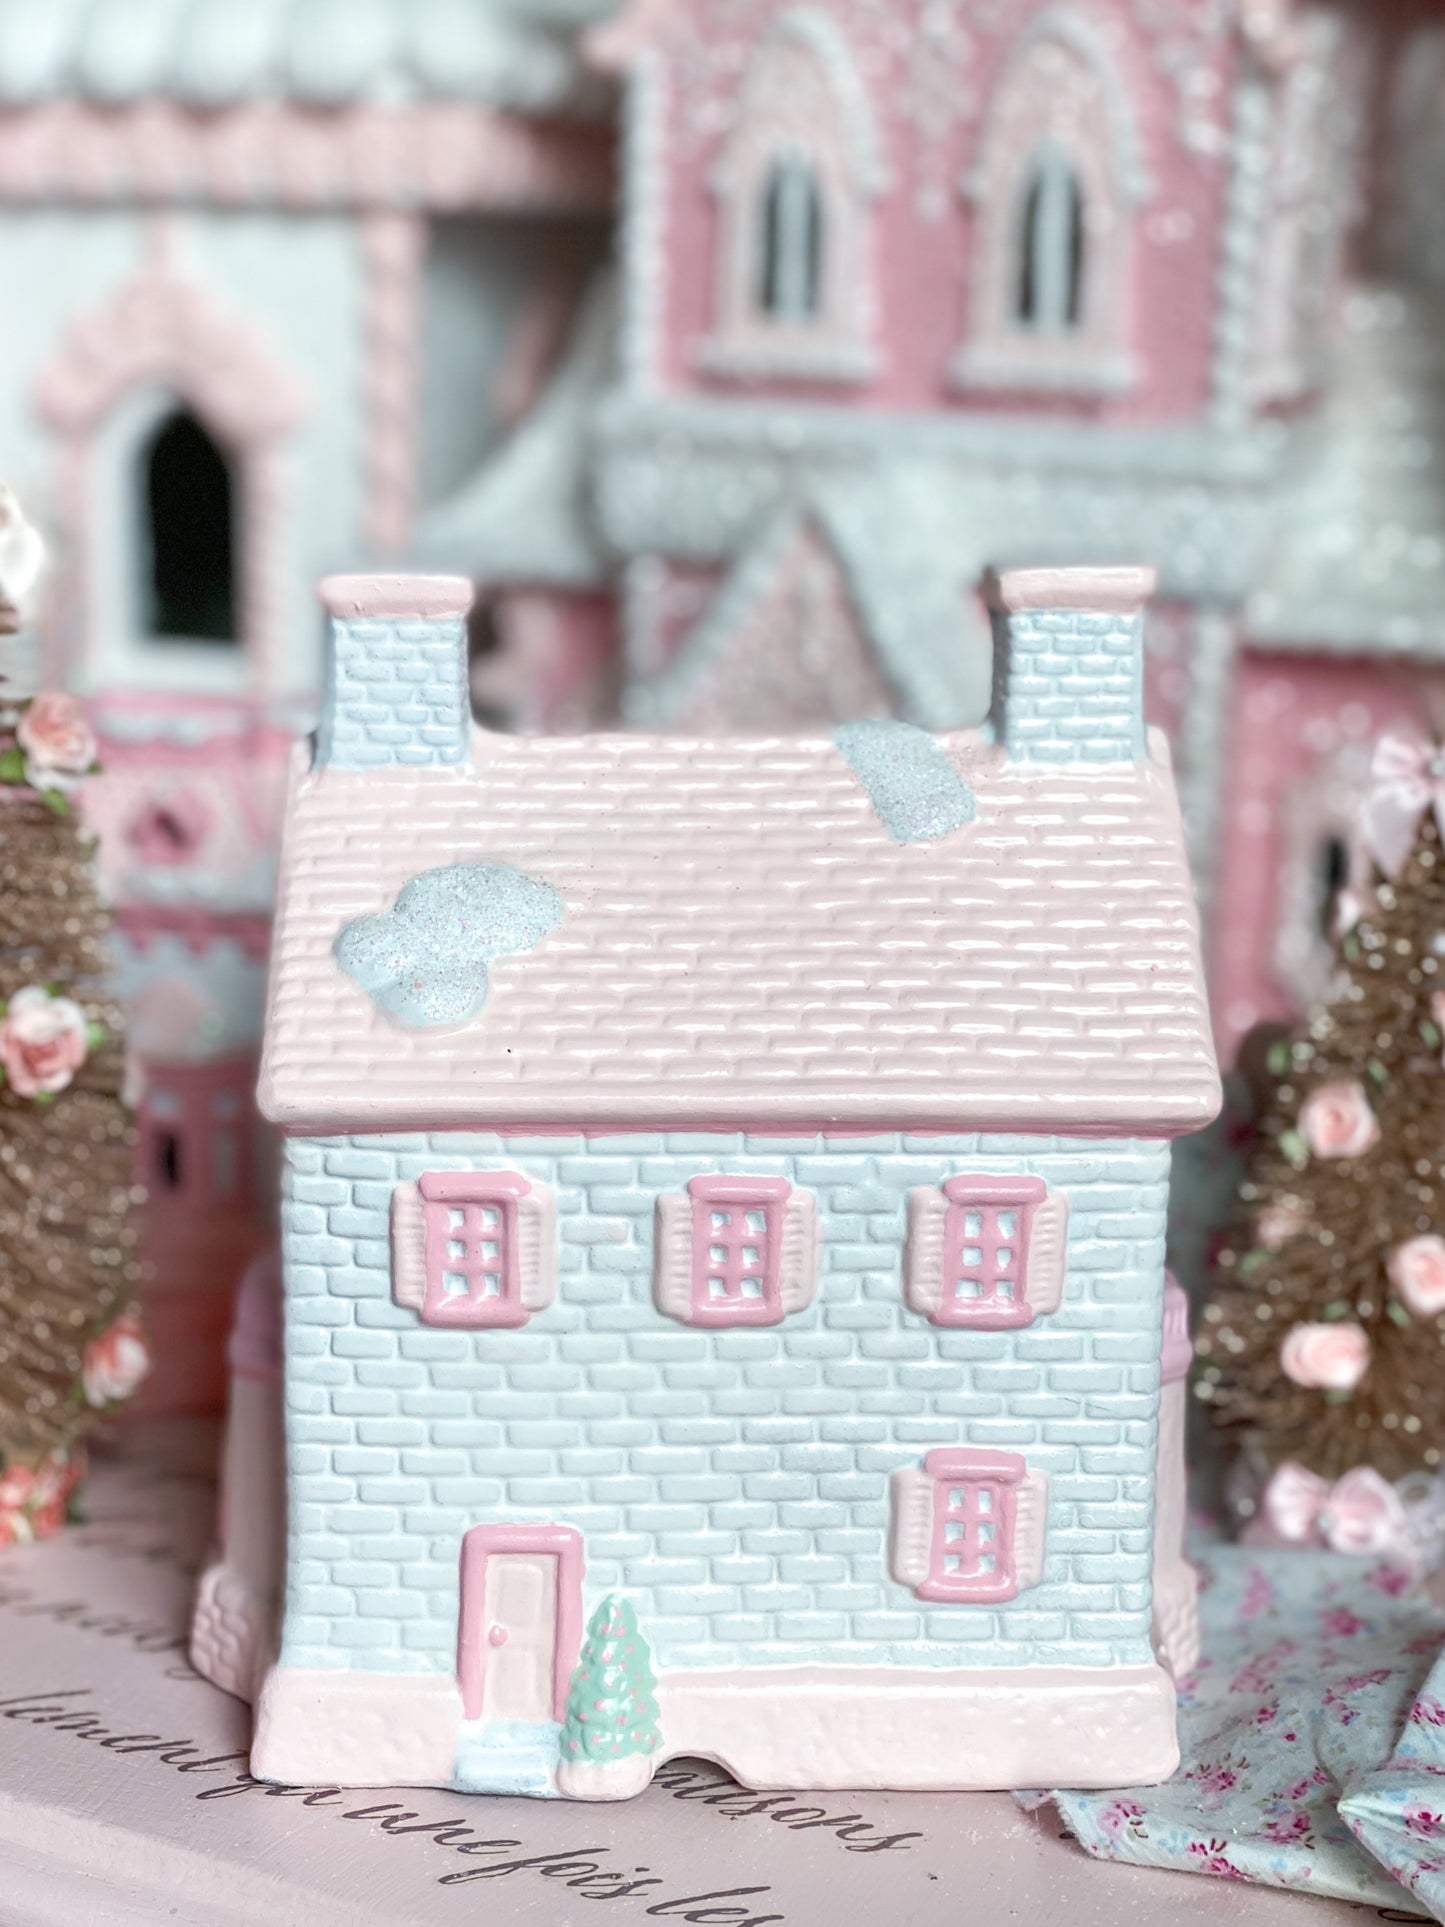 Bespoke Hand Painted Pastel Pink and White Christmas Village Antebellum Grand Hotel